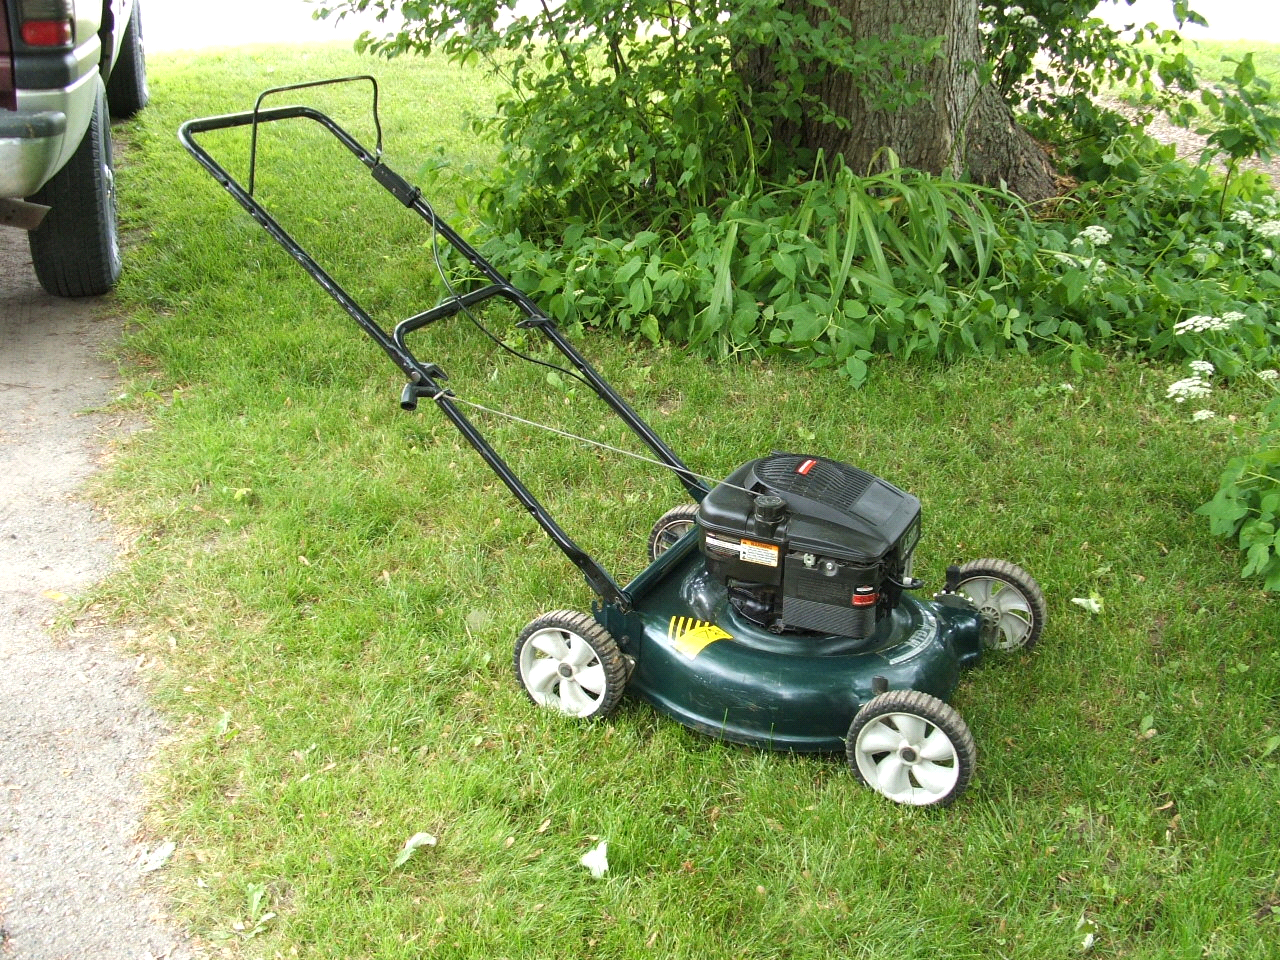  Signs You Need A New Lawn Mower